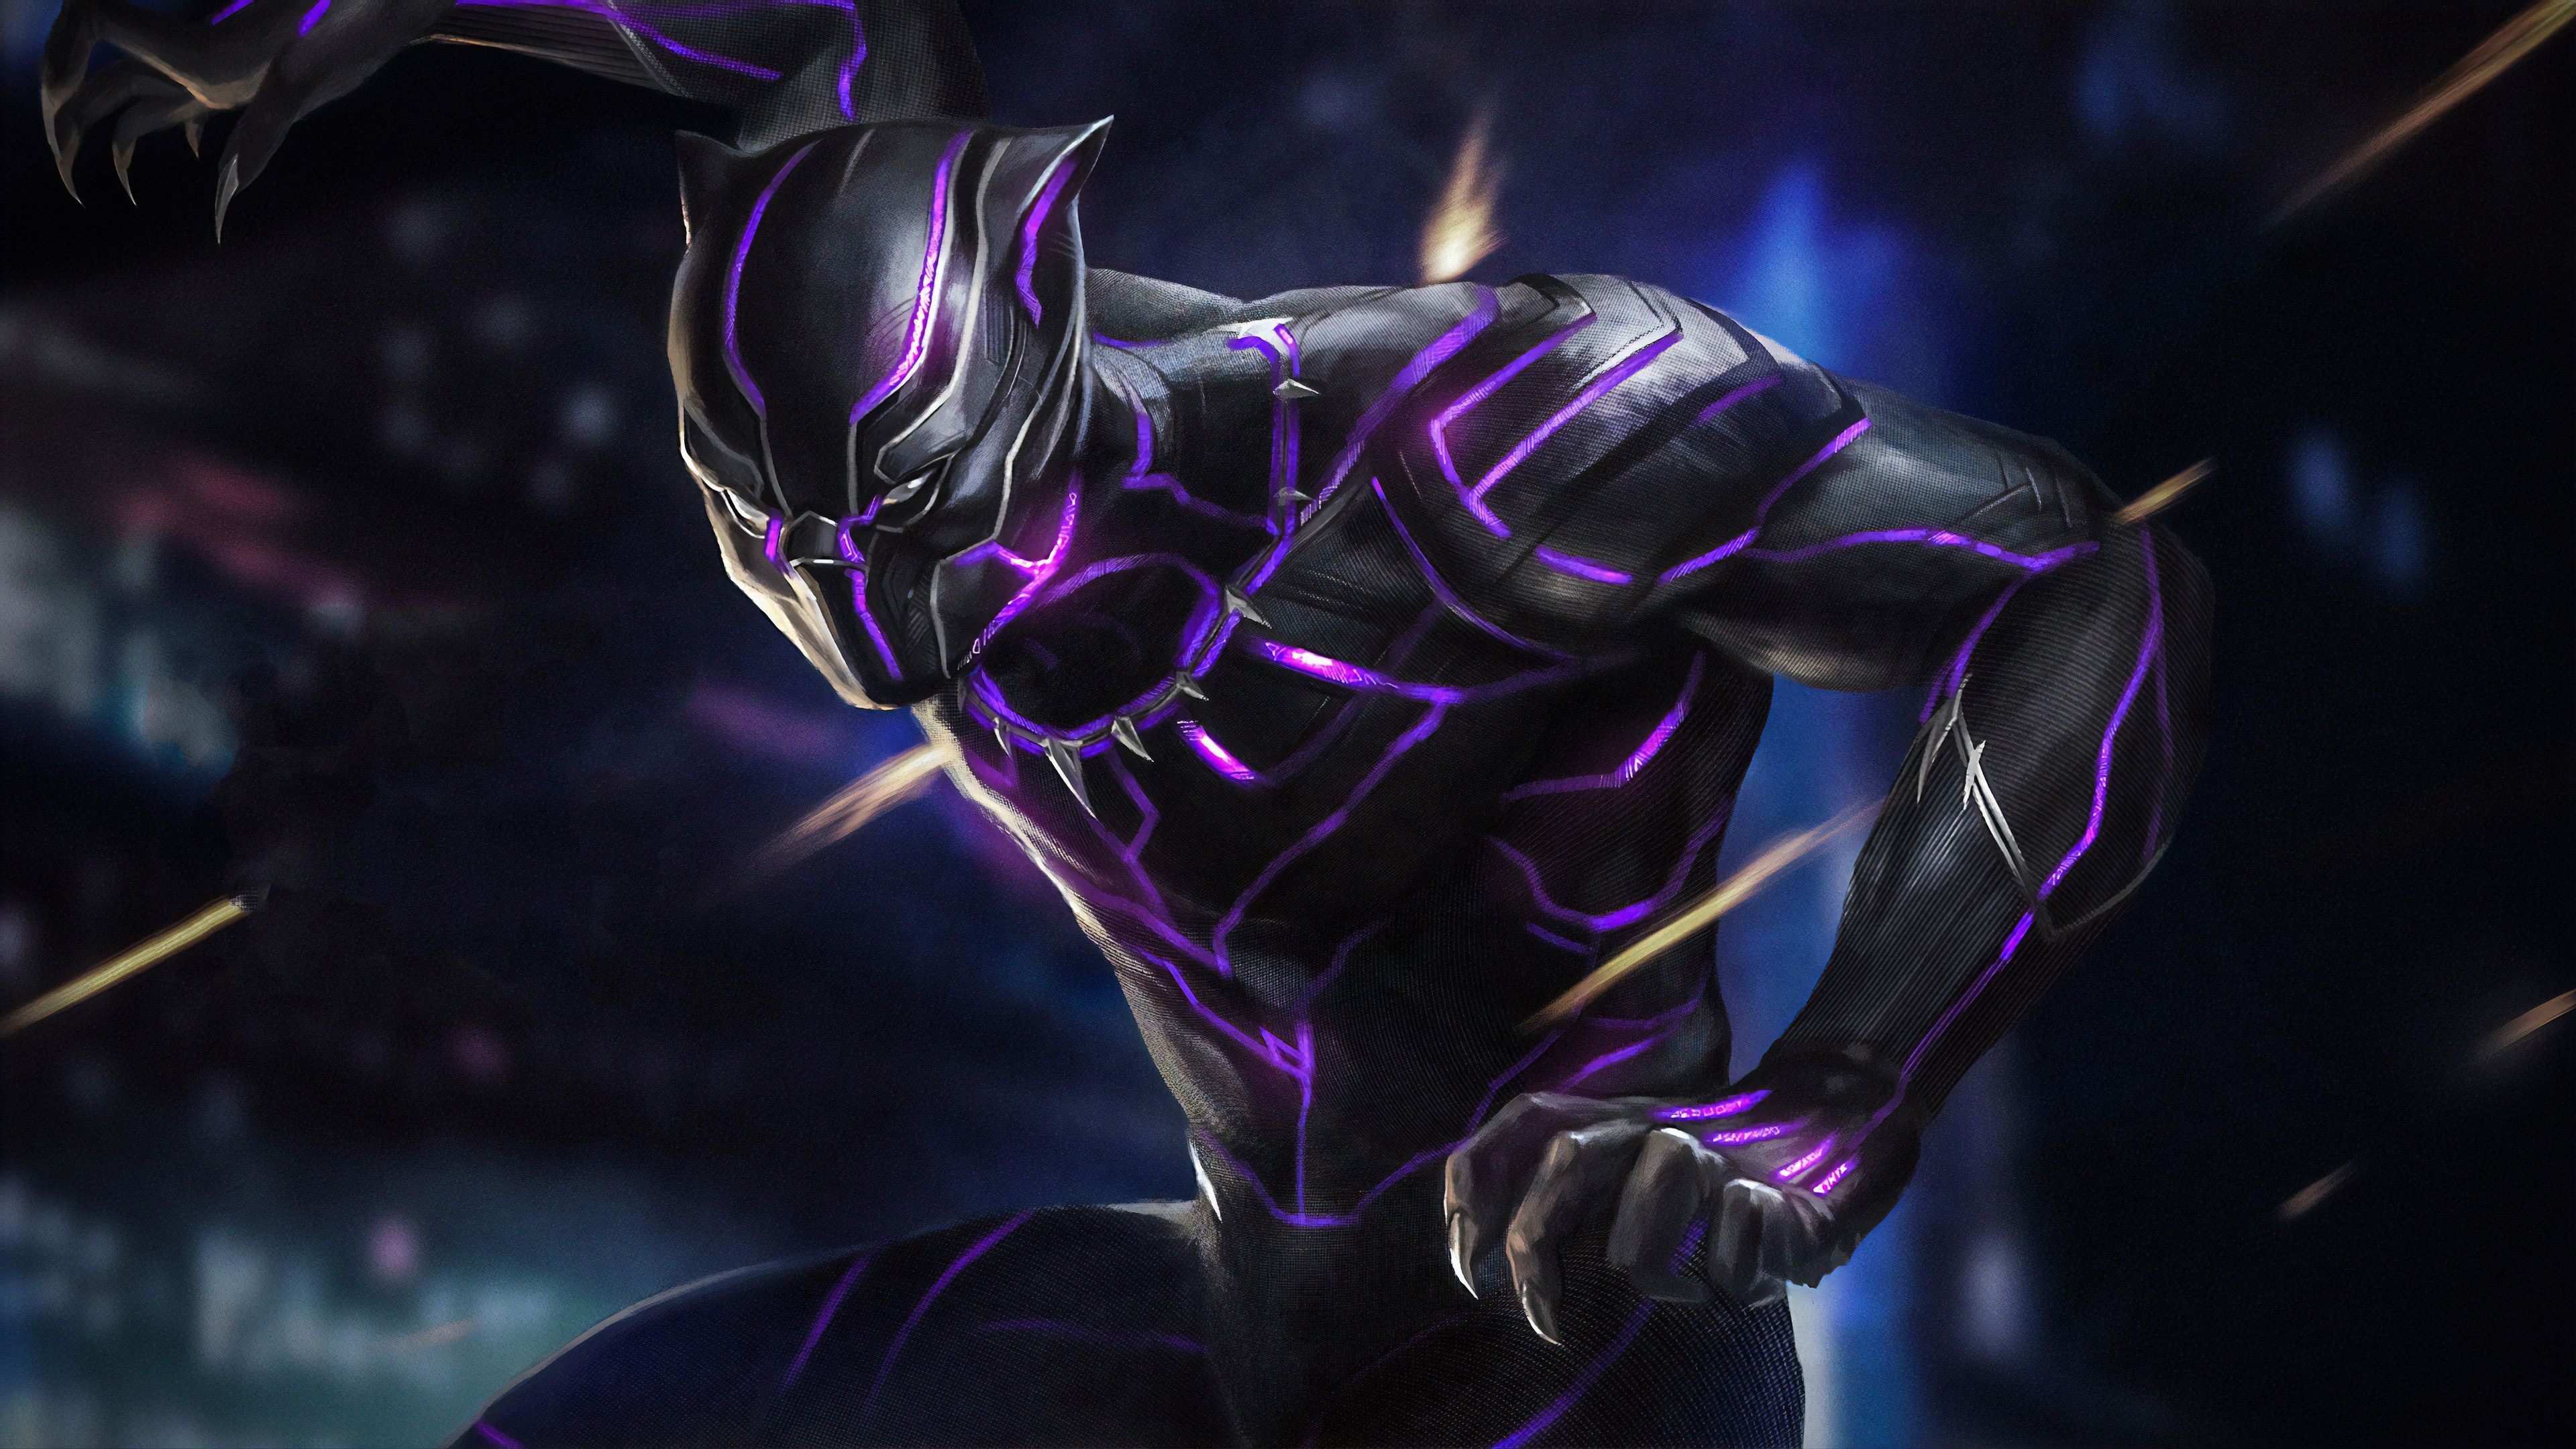 Black Panther New Superheroes Wallpaper, Hd Wallpaper, Black Panther Wallpaper, Artwork Wallpaper. Black Panther HD Wallpaper, Black Panther Art, Black Panther